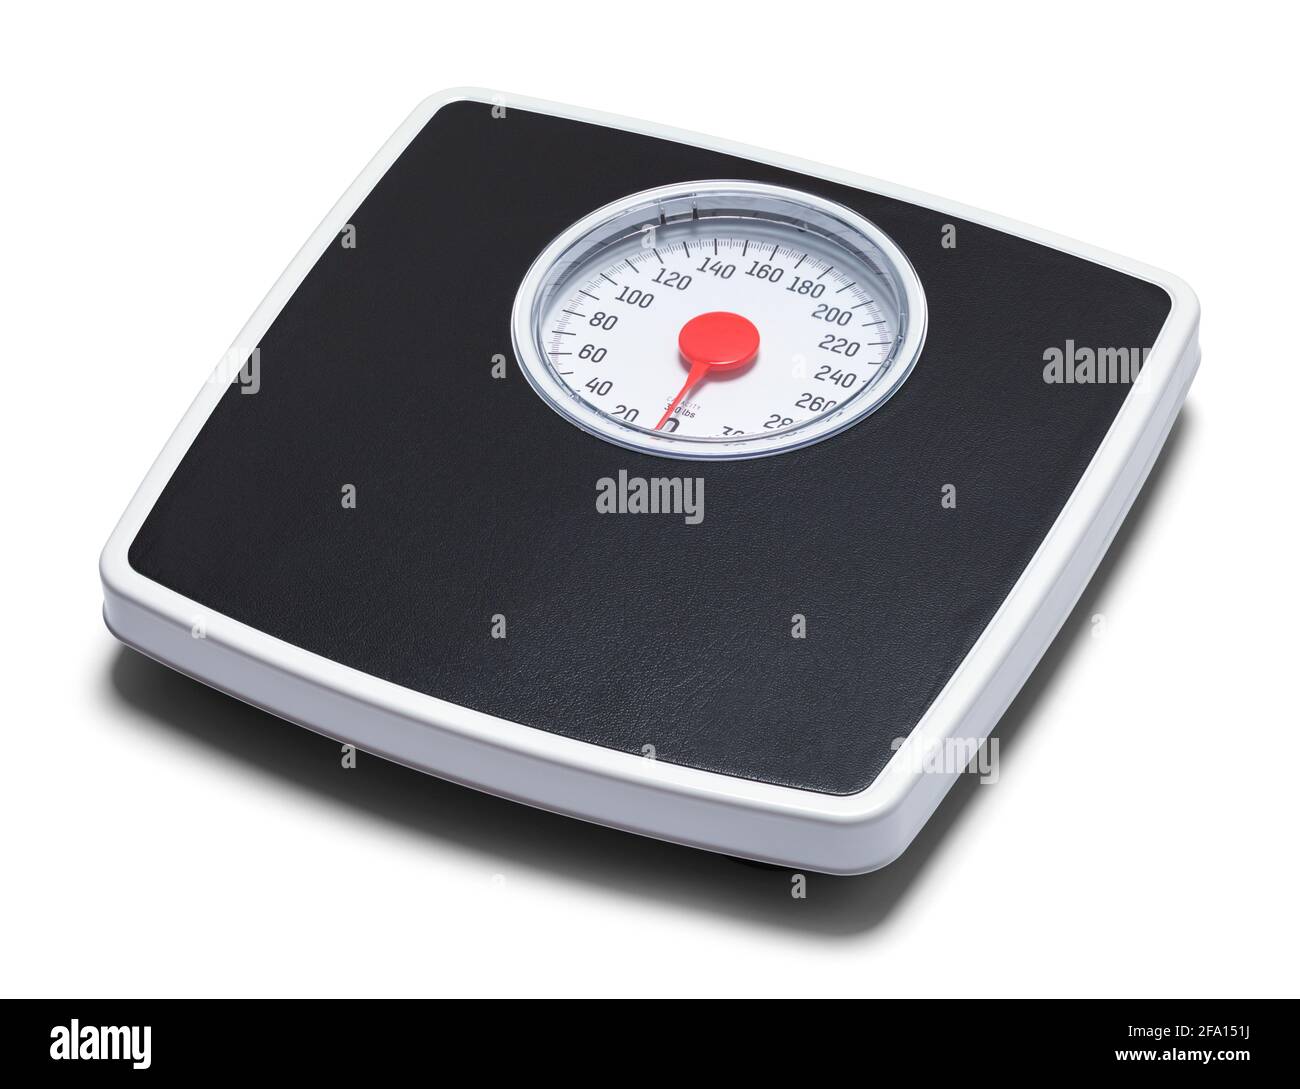 https://c8.alamy.com/comp/2FA151J/square-bathroom-scale-with-red-dial-cut-out-2FA151J.jpg